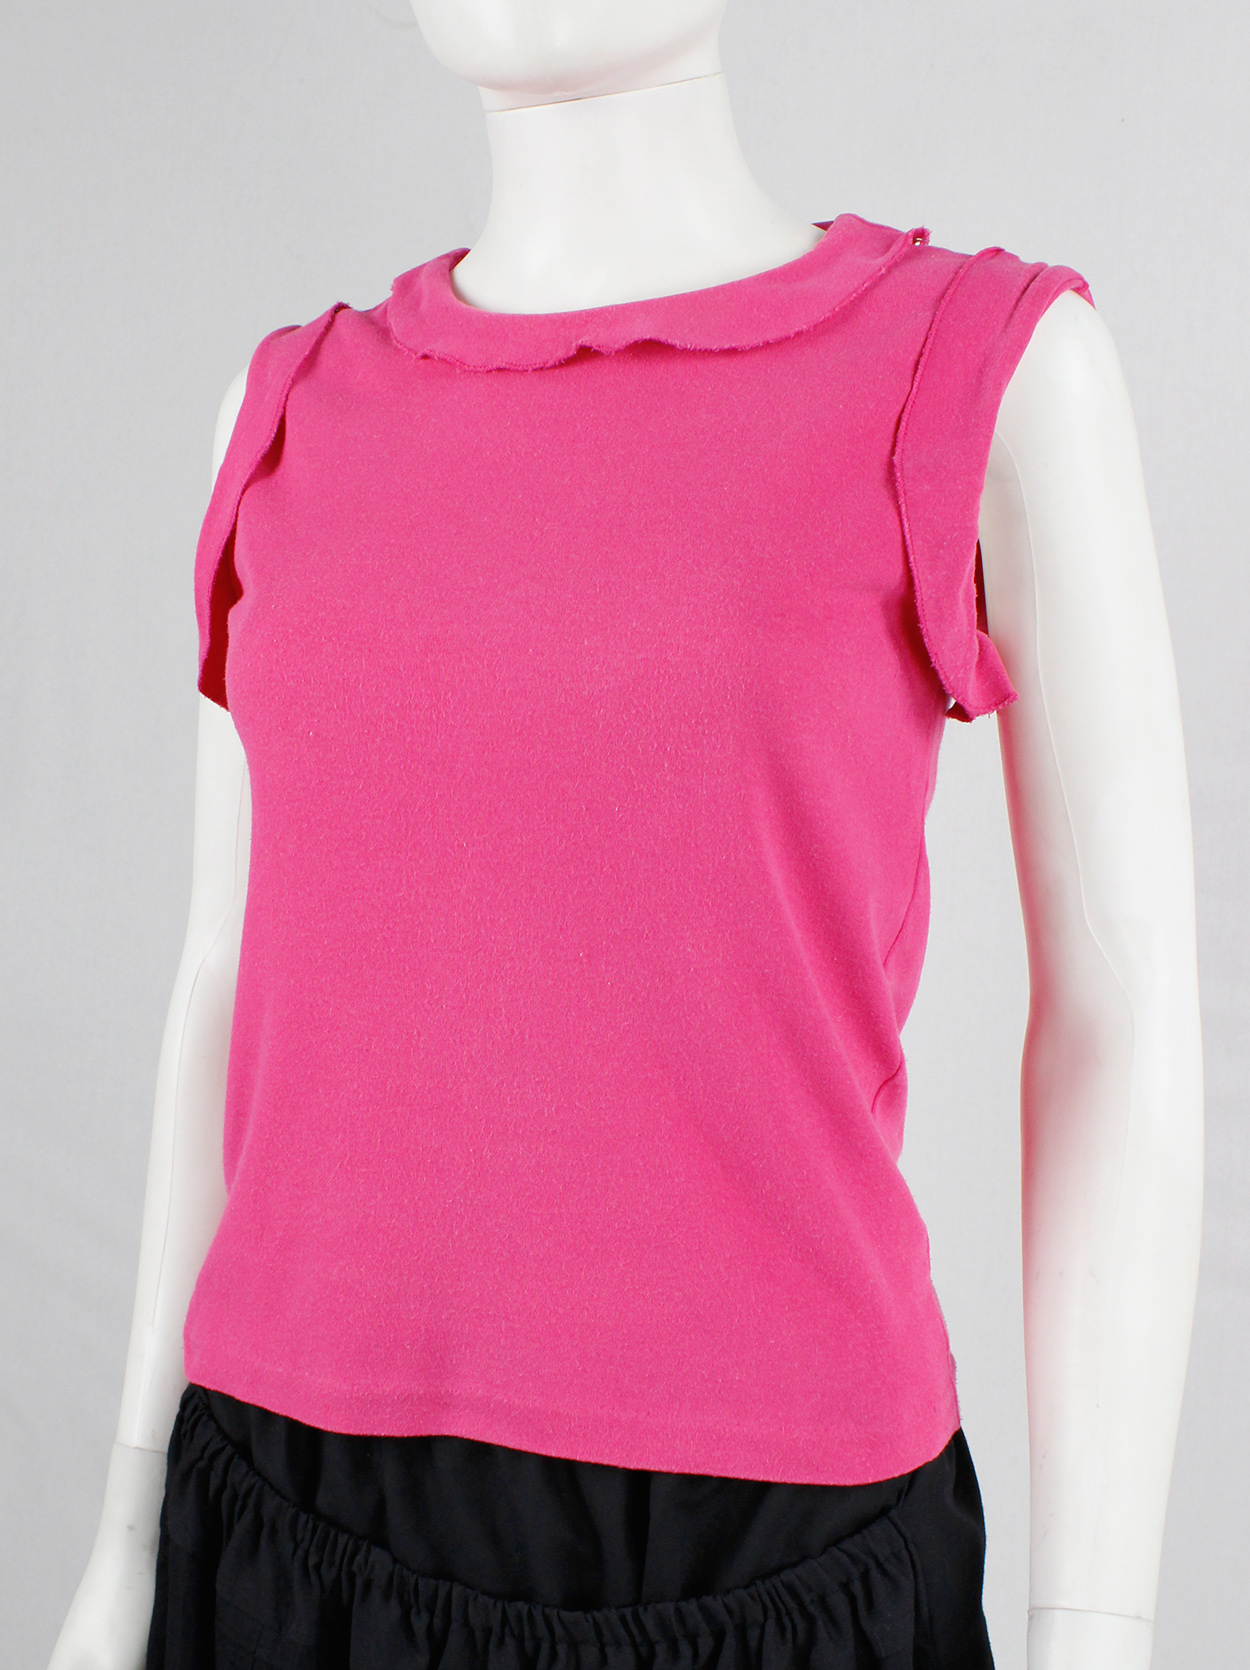 Maison Martin Margiela reproduction of a 1993 pink top with shoulder ...